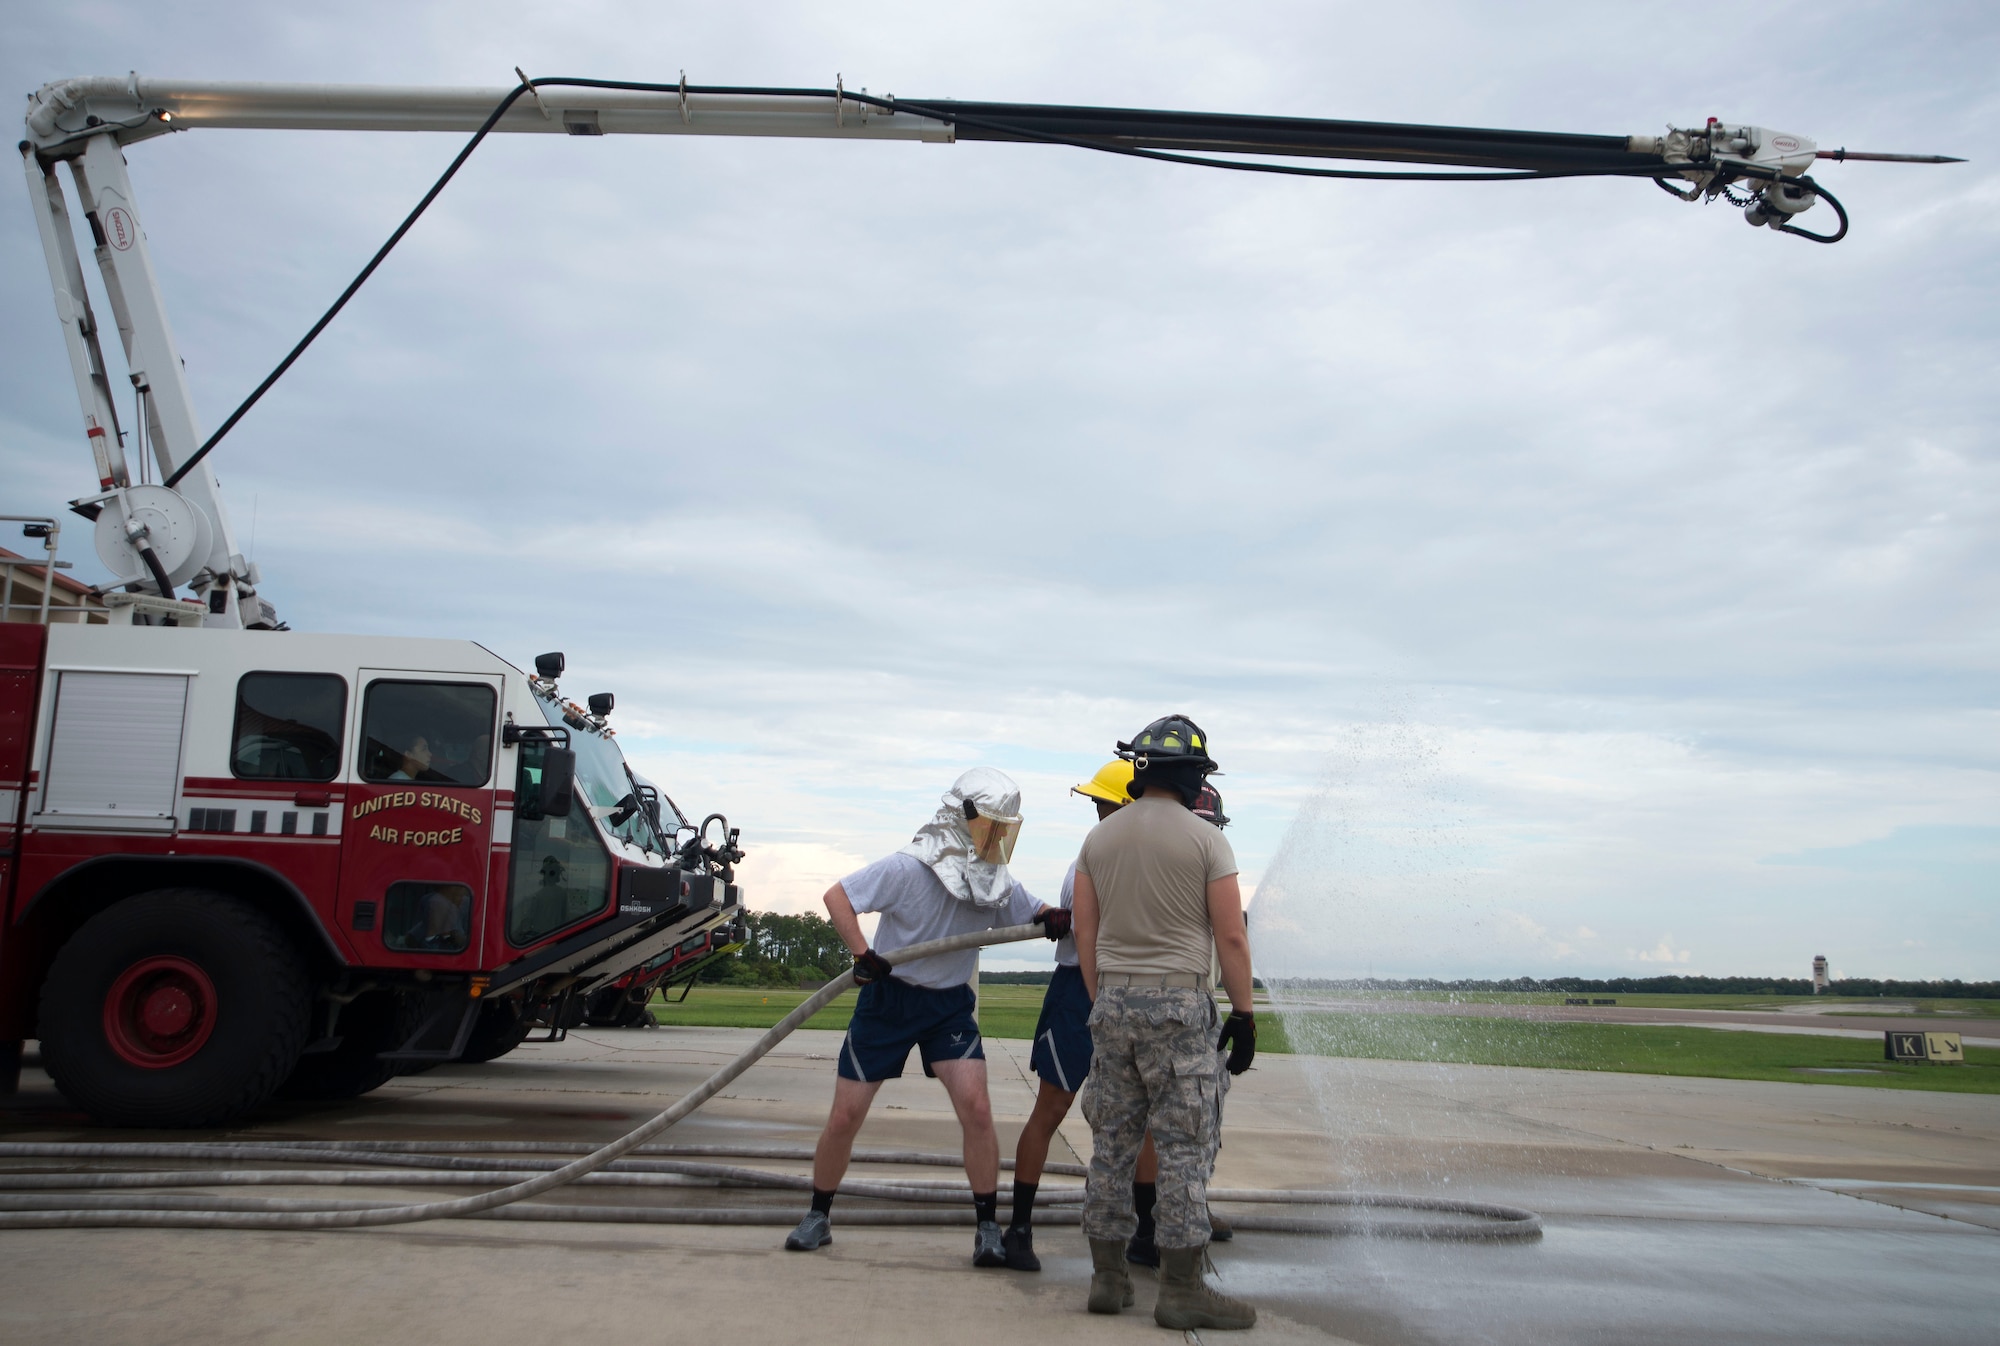 U.S. Air Force Fire Protection Airmen with the 6th Civil Engineer Squadron assist cadets operating a fire hose at the Crash Fire Station on MacDill Air Force Base, Fla., July 6, 2018.